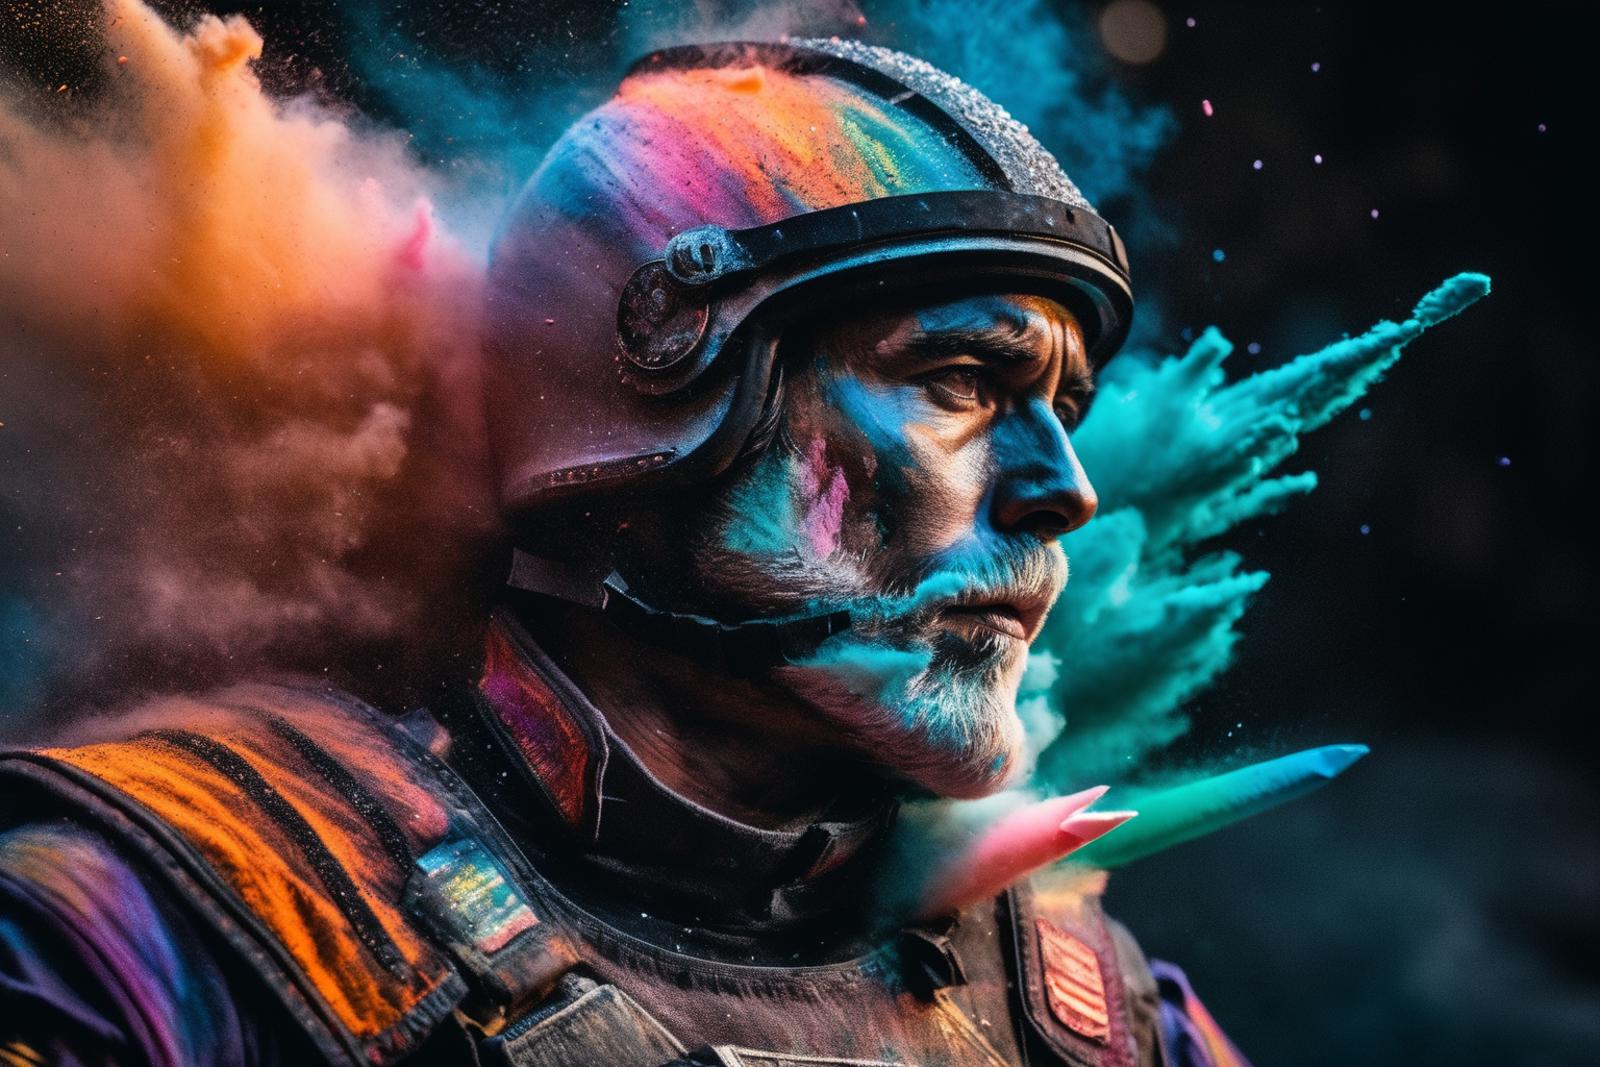 Colorful Rainbow Man in a Helmet with Painted Face and Arm